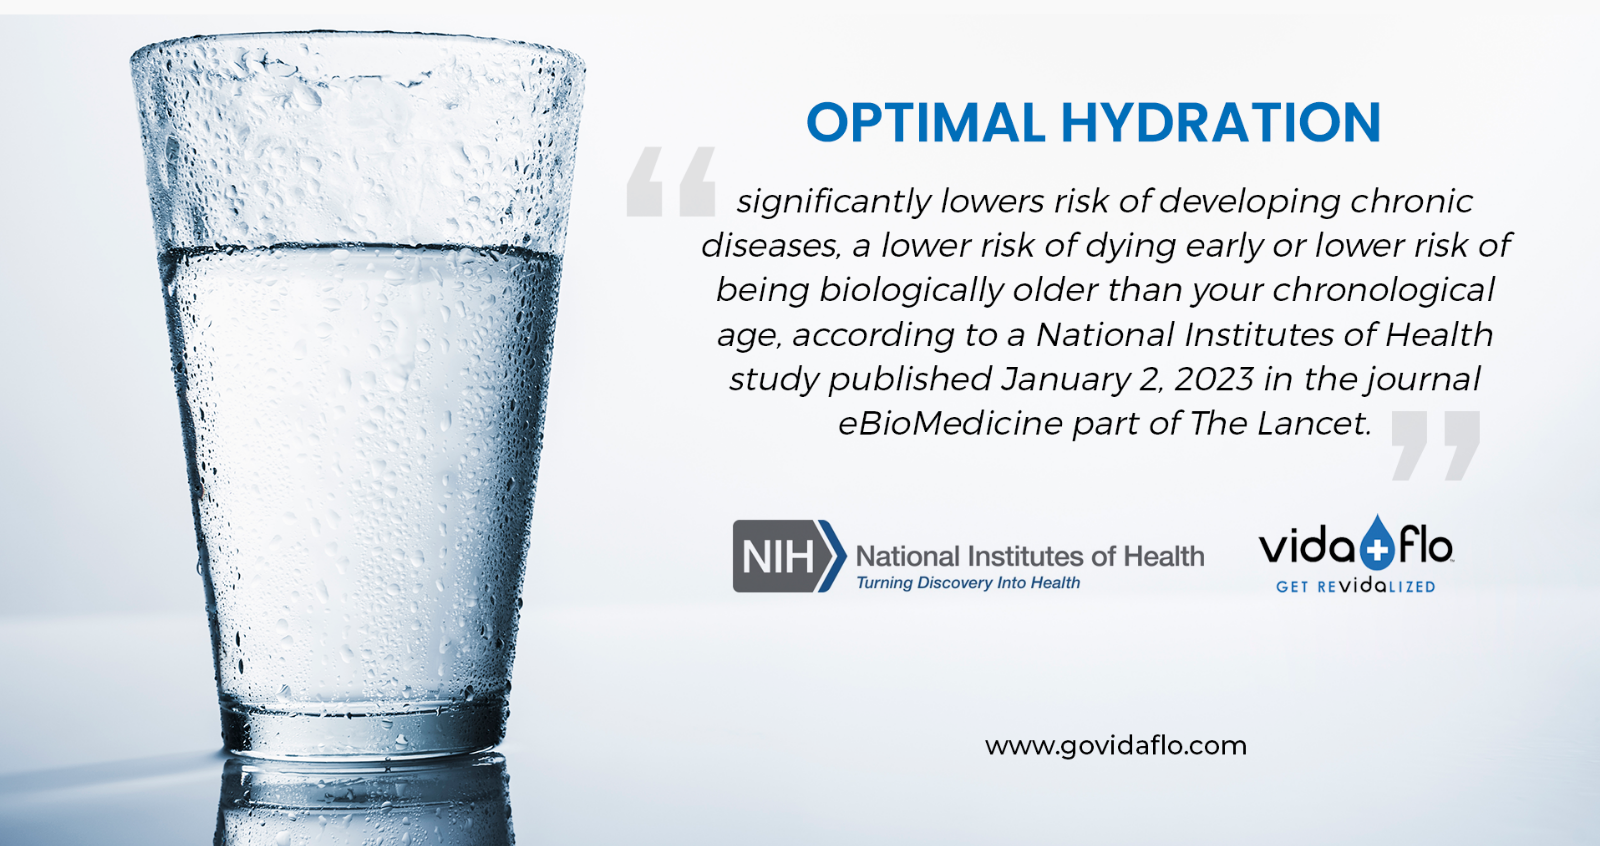 An image of a glass of water with a quote on optimal hydration in Johns Creek, GA.